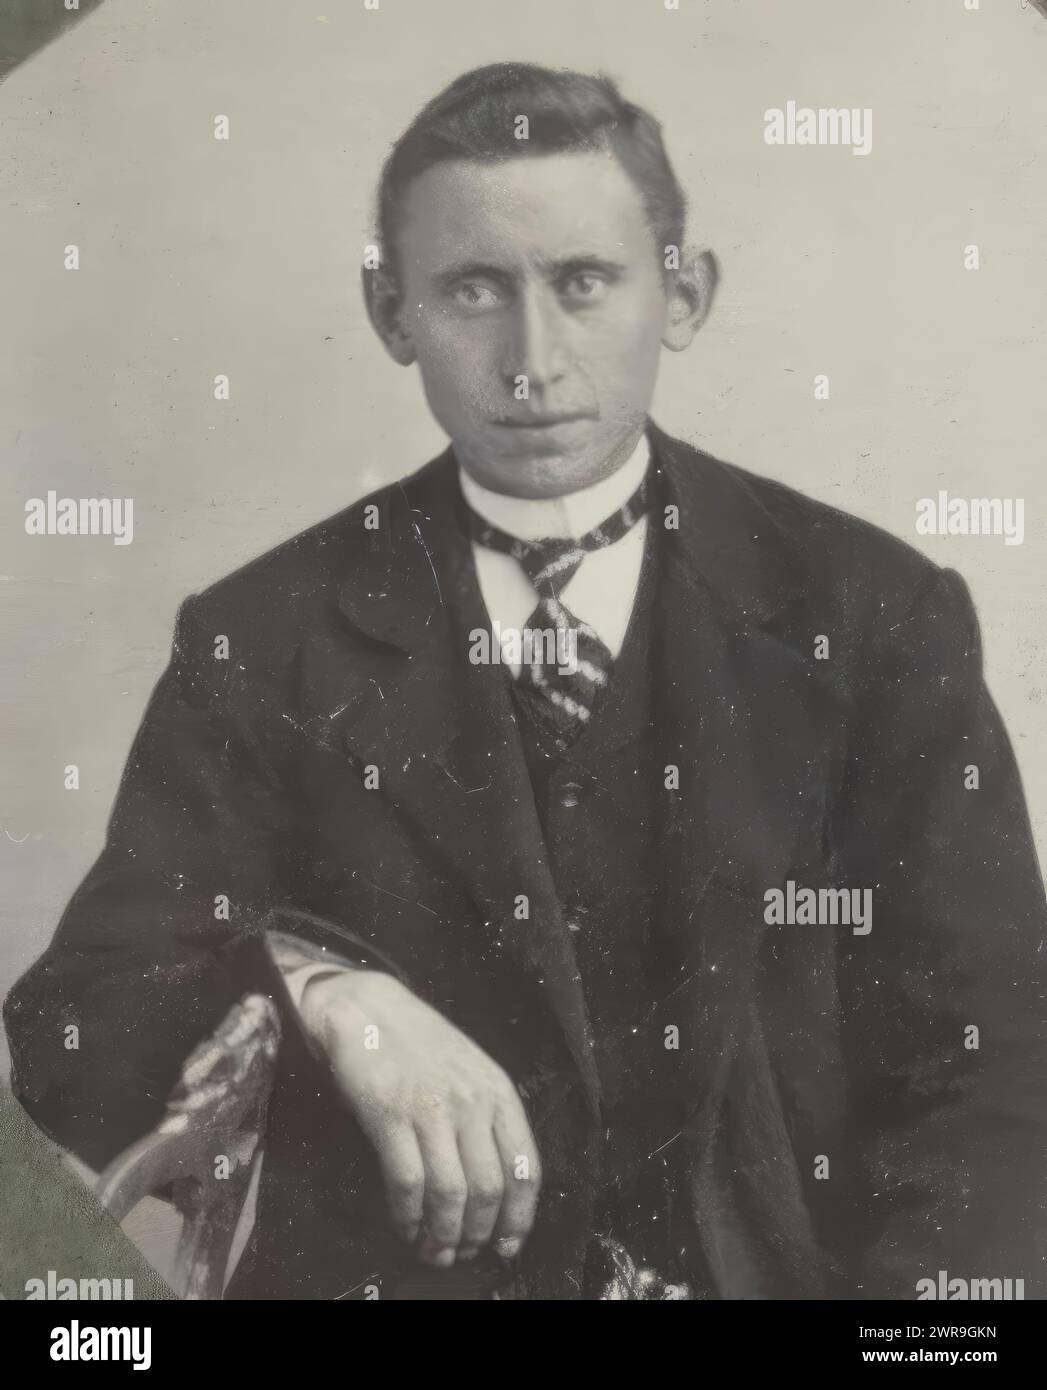 Portrait of a seated man with a striped tie, referred to as 'Father', Part of Album with vending machine photos of a Dutch family., anonymous, Netherlands, c. 1910 - c. 1920, cardboard, height 41 mm × width 29 mm, photograph Stock Photo